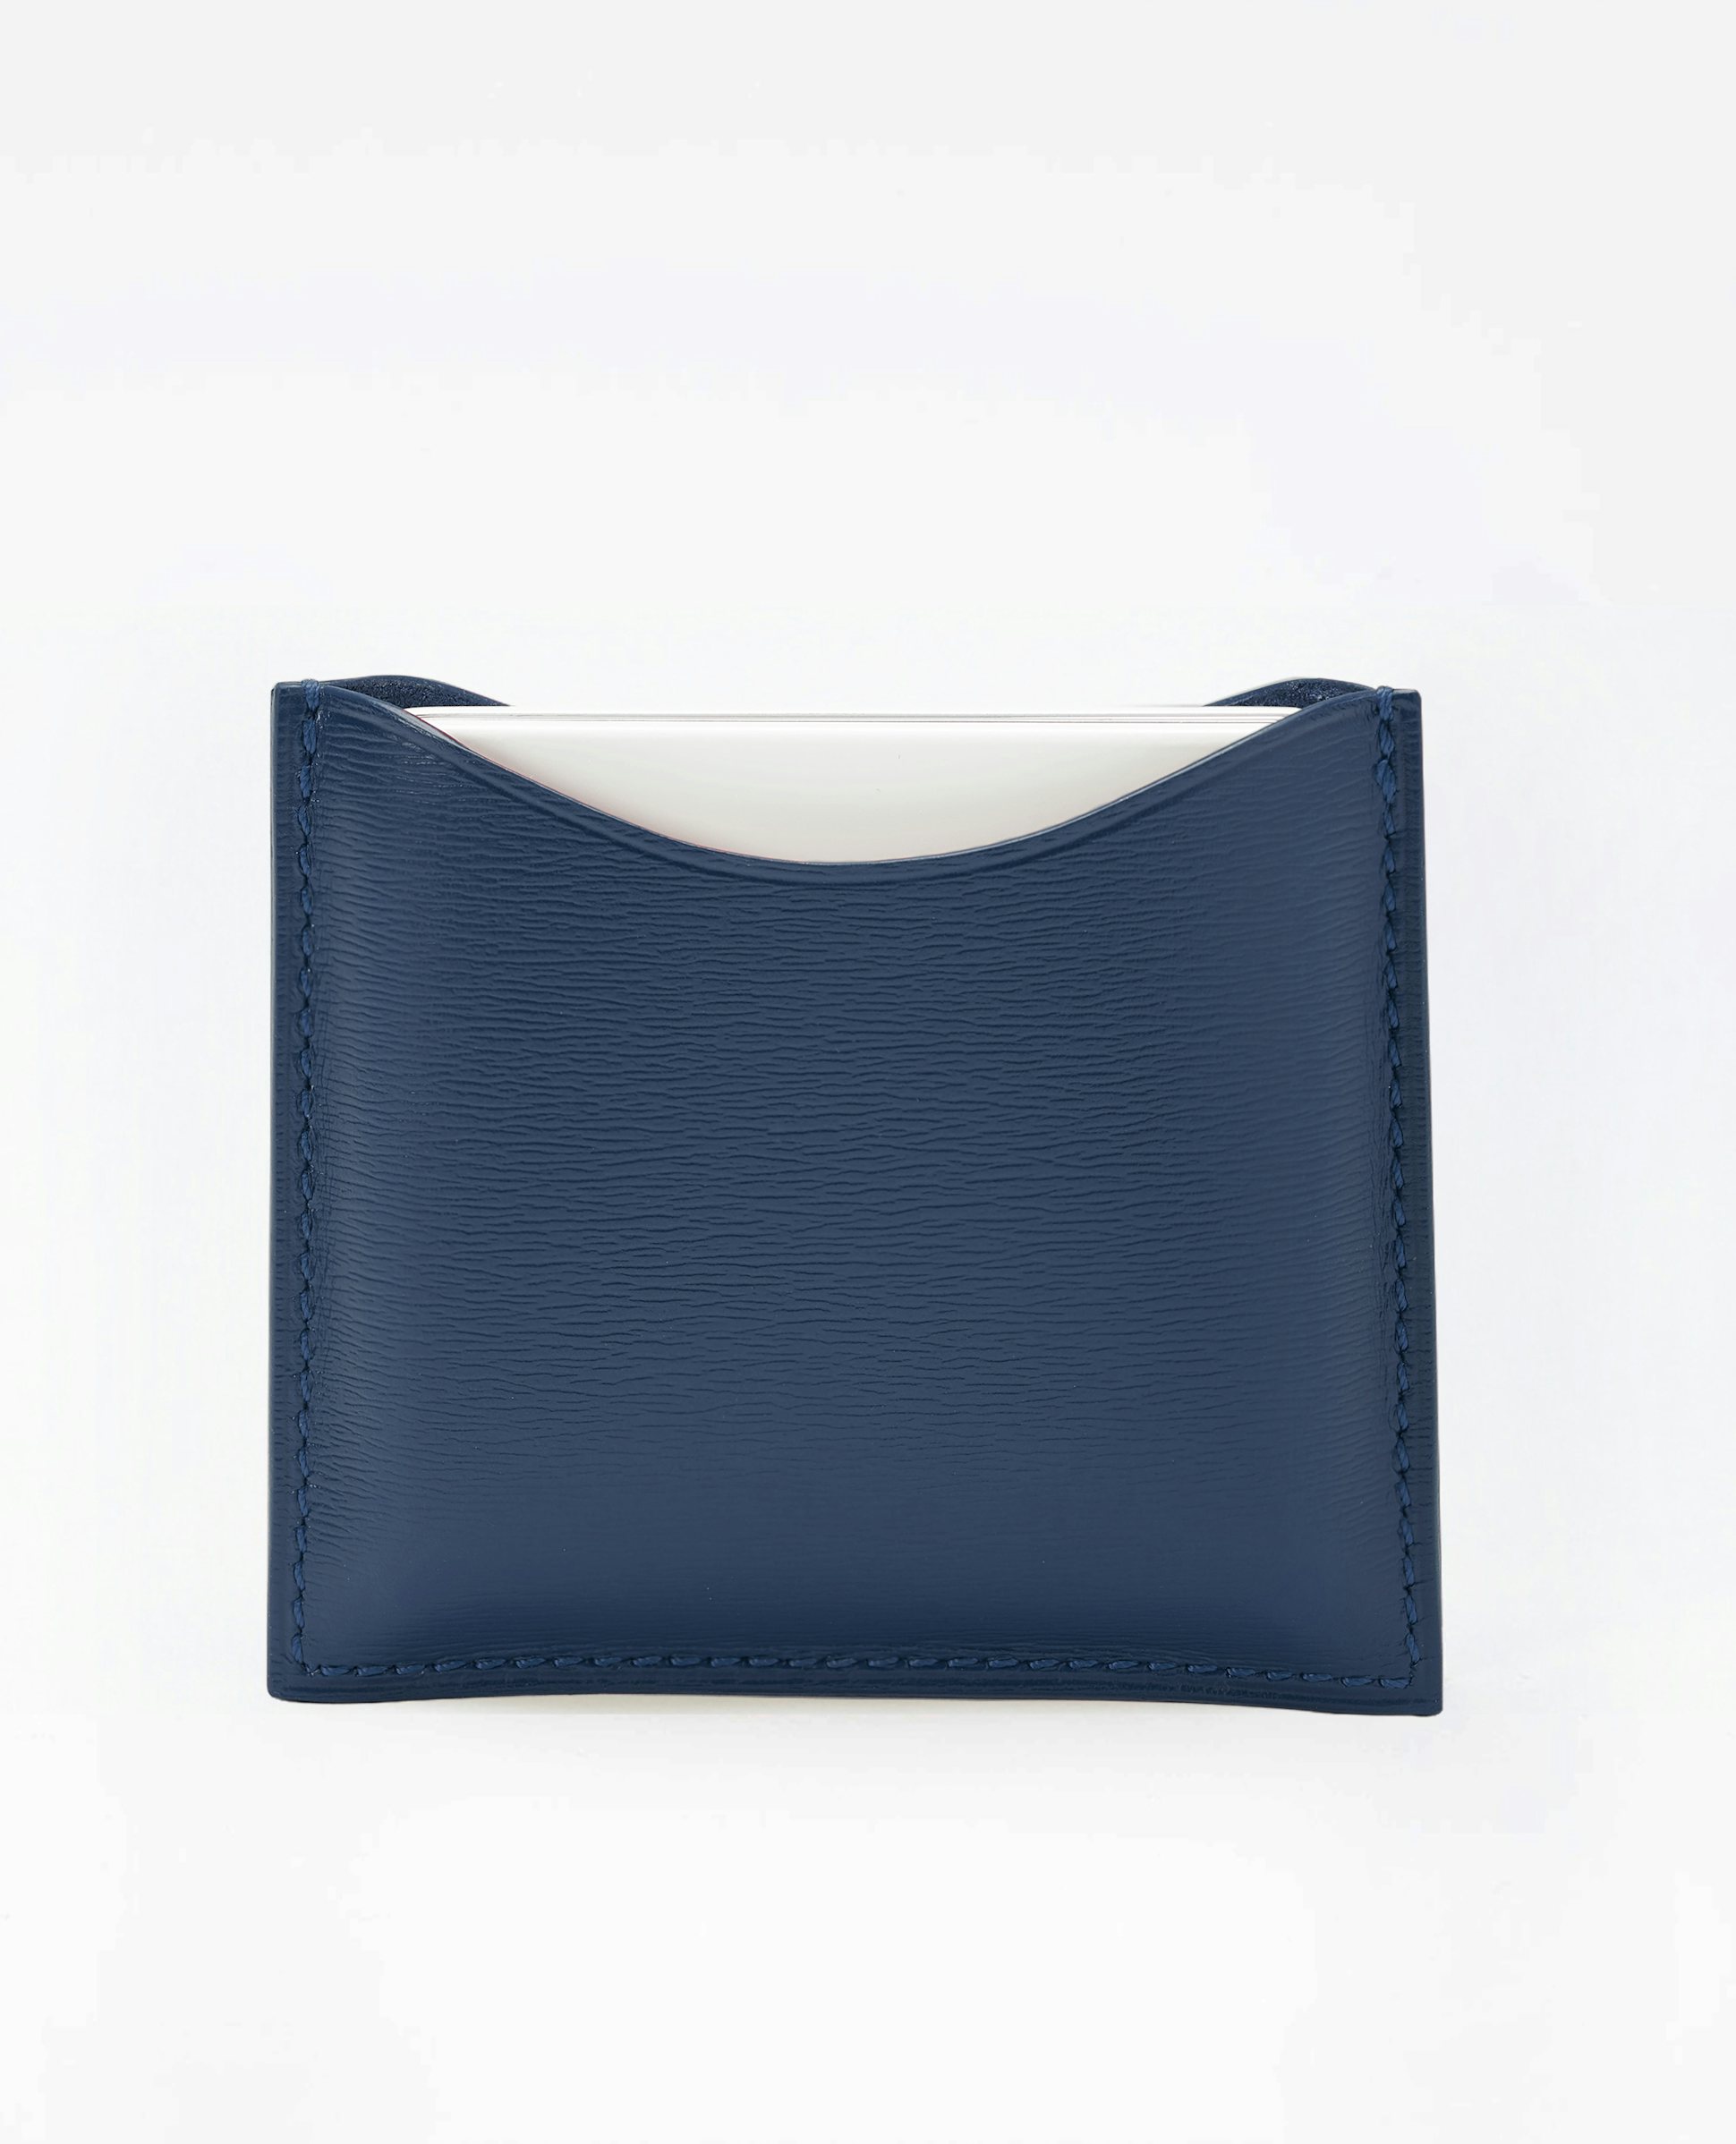 La bouche rouge upcycled fine leather compact case in Navy blue